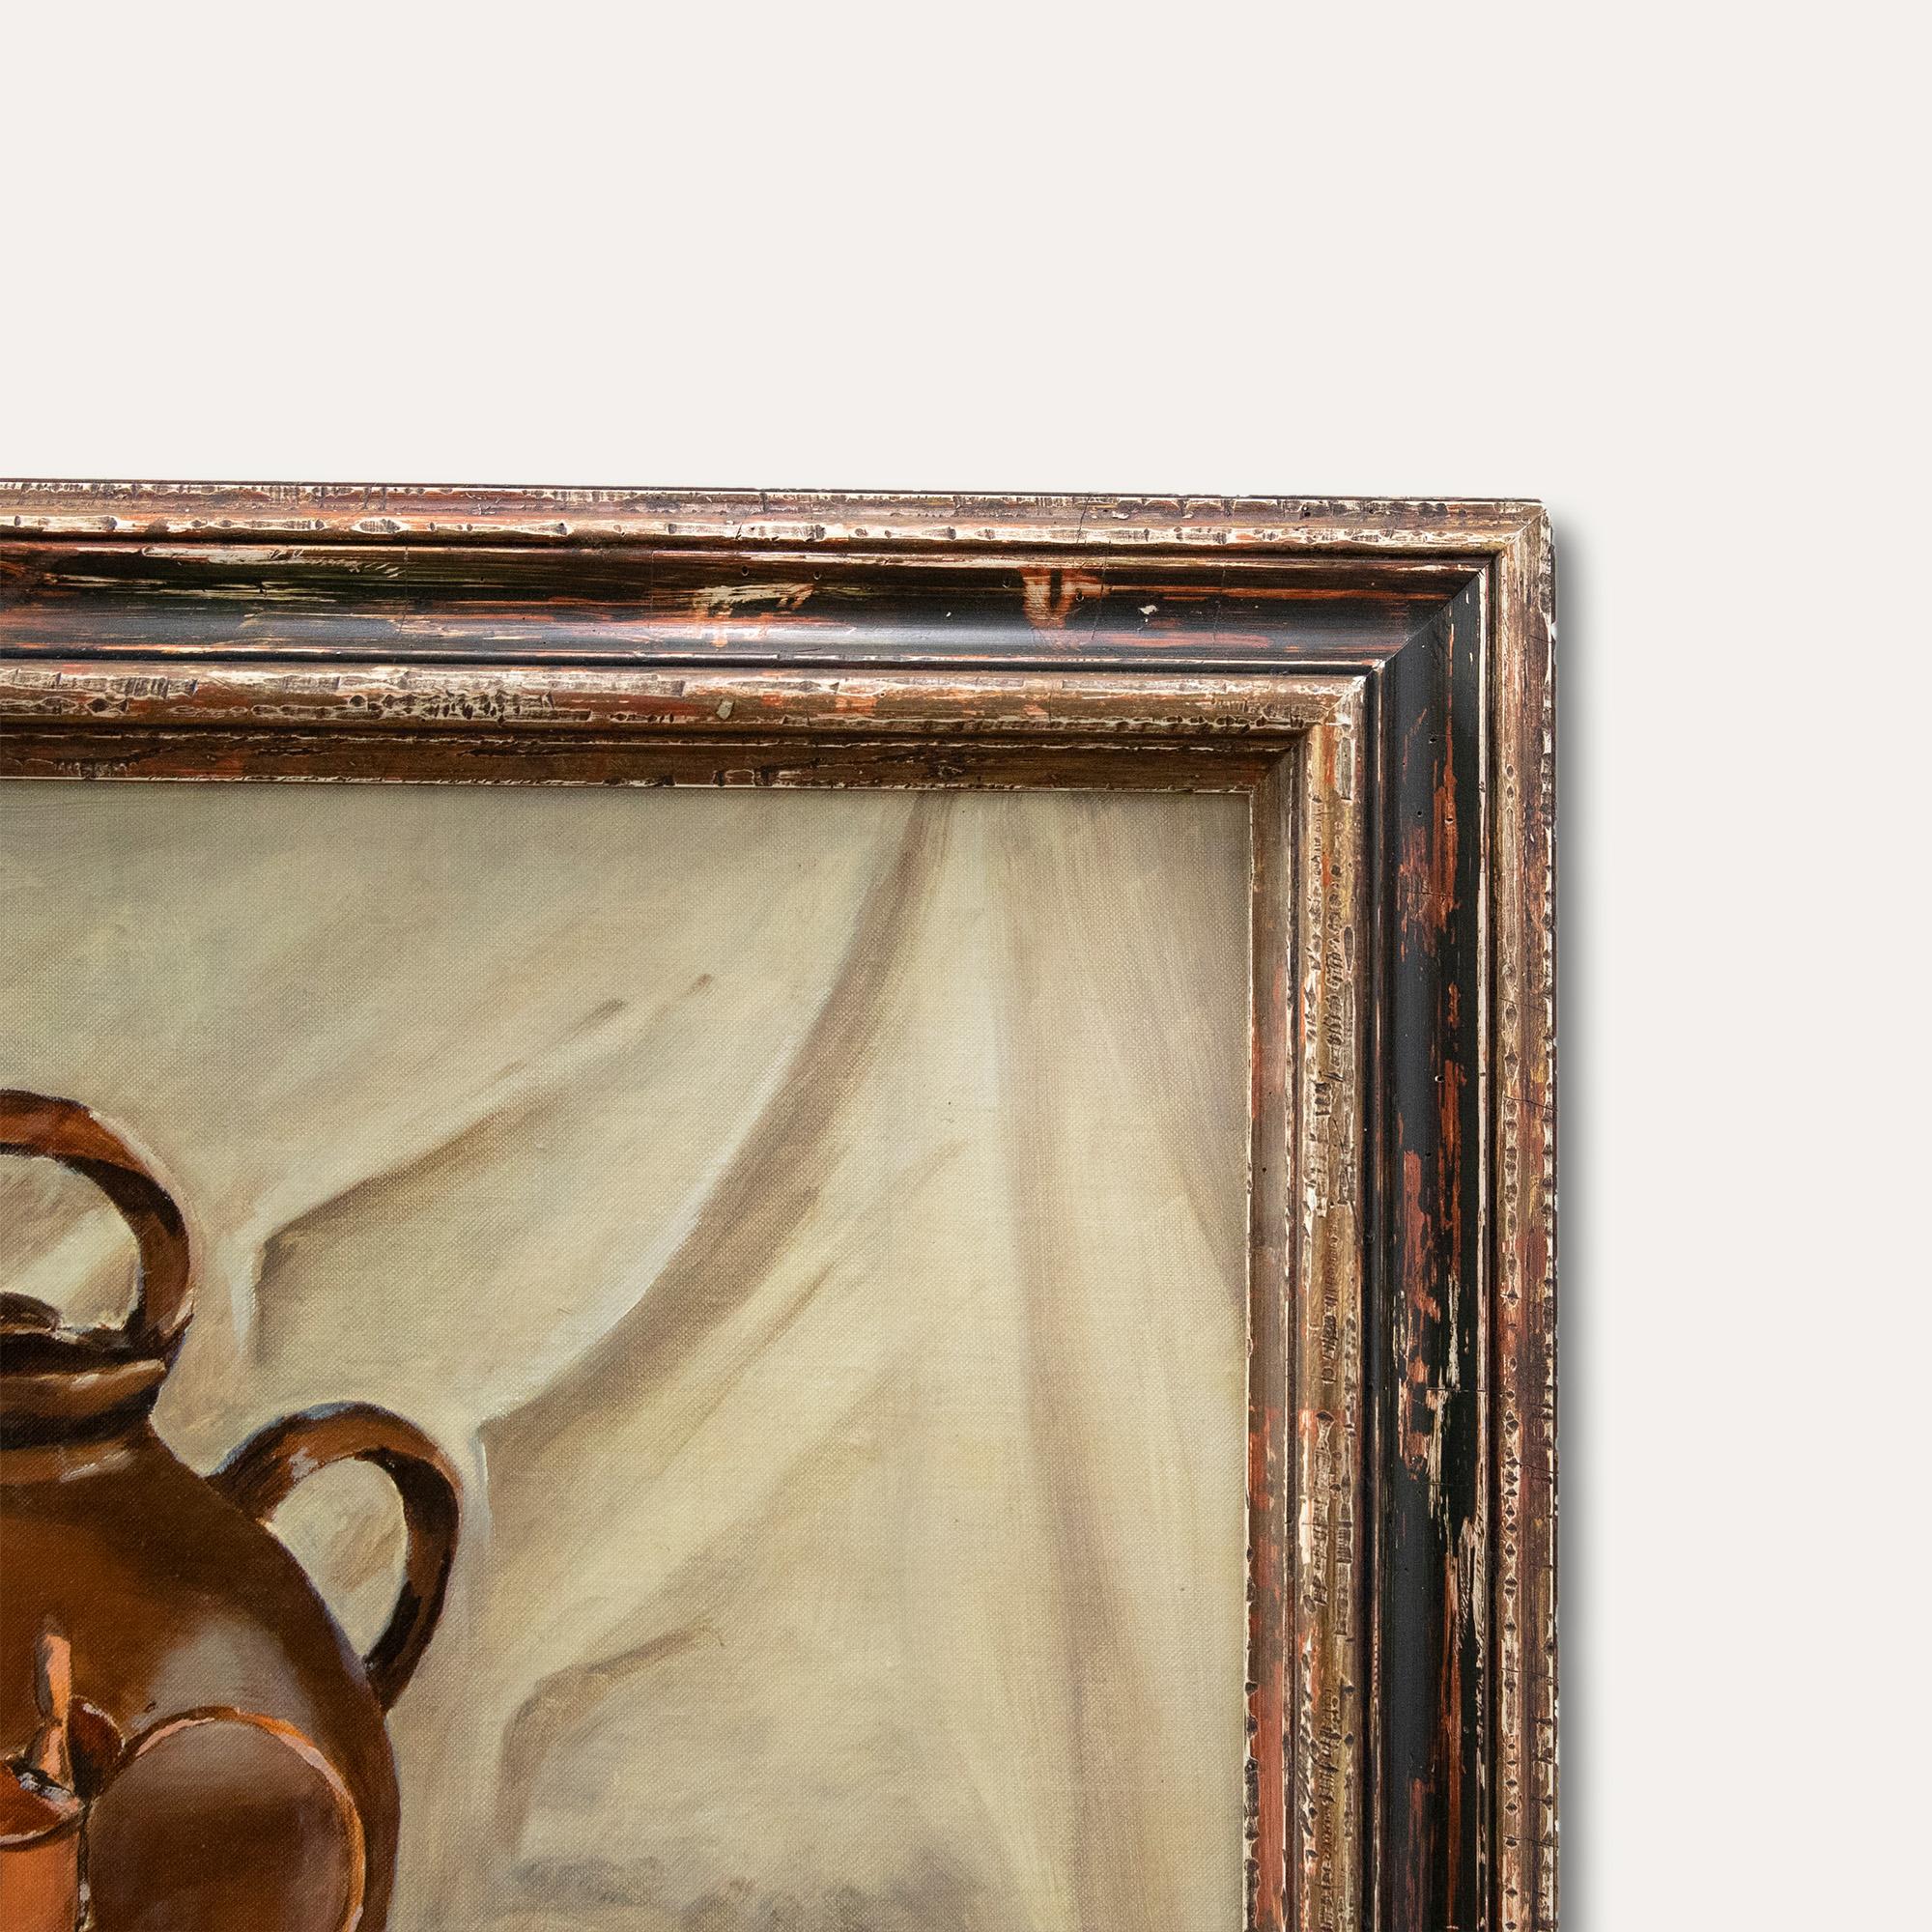 A striking still life composition of a copper and terracotta jug with orchard apples on linen. Well presented in a distressed frame with the artist's signature and date inscribed to the reverse. On canvas board.